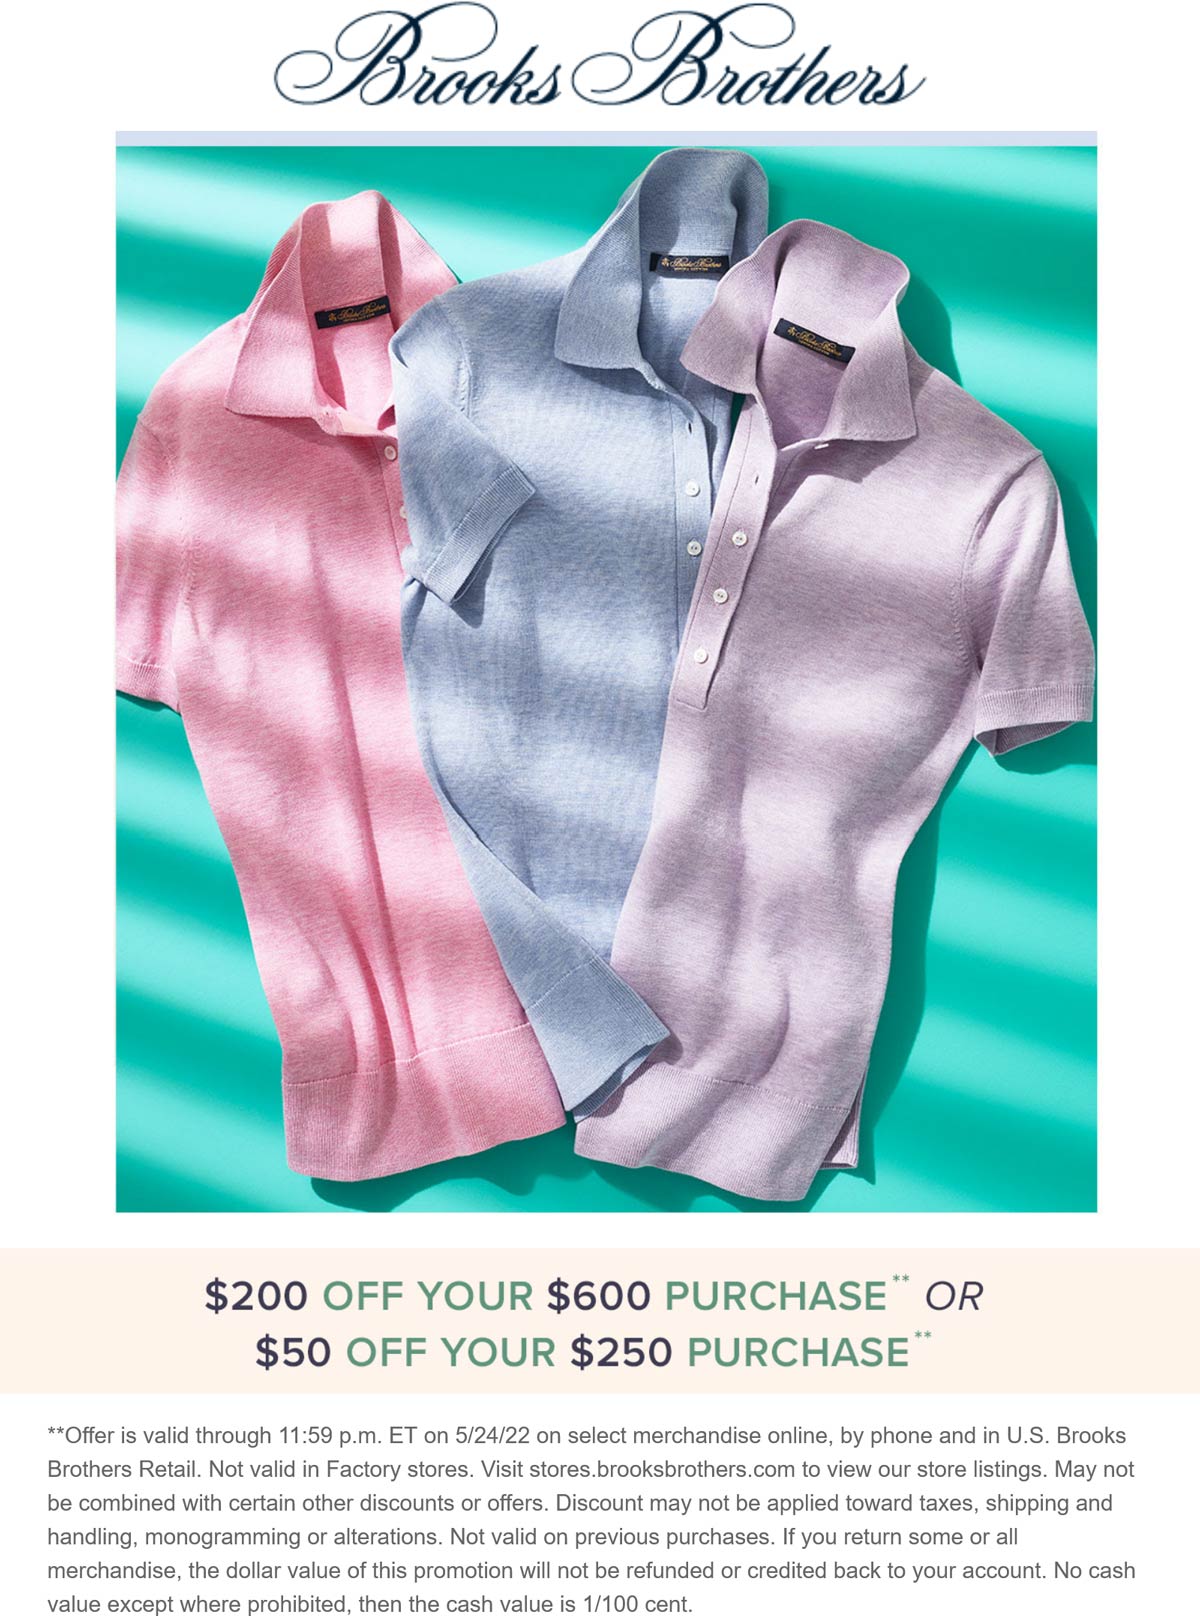 Brooks Brothers stores Coupon  $50-$200 off $250+ at Brooks Brothers, ditto online #brooksbrothers 